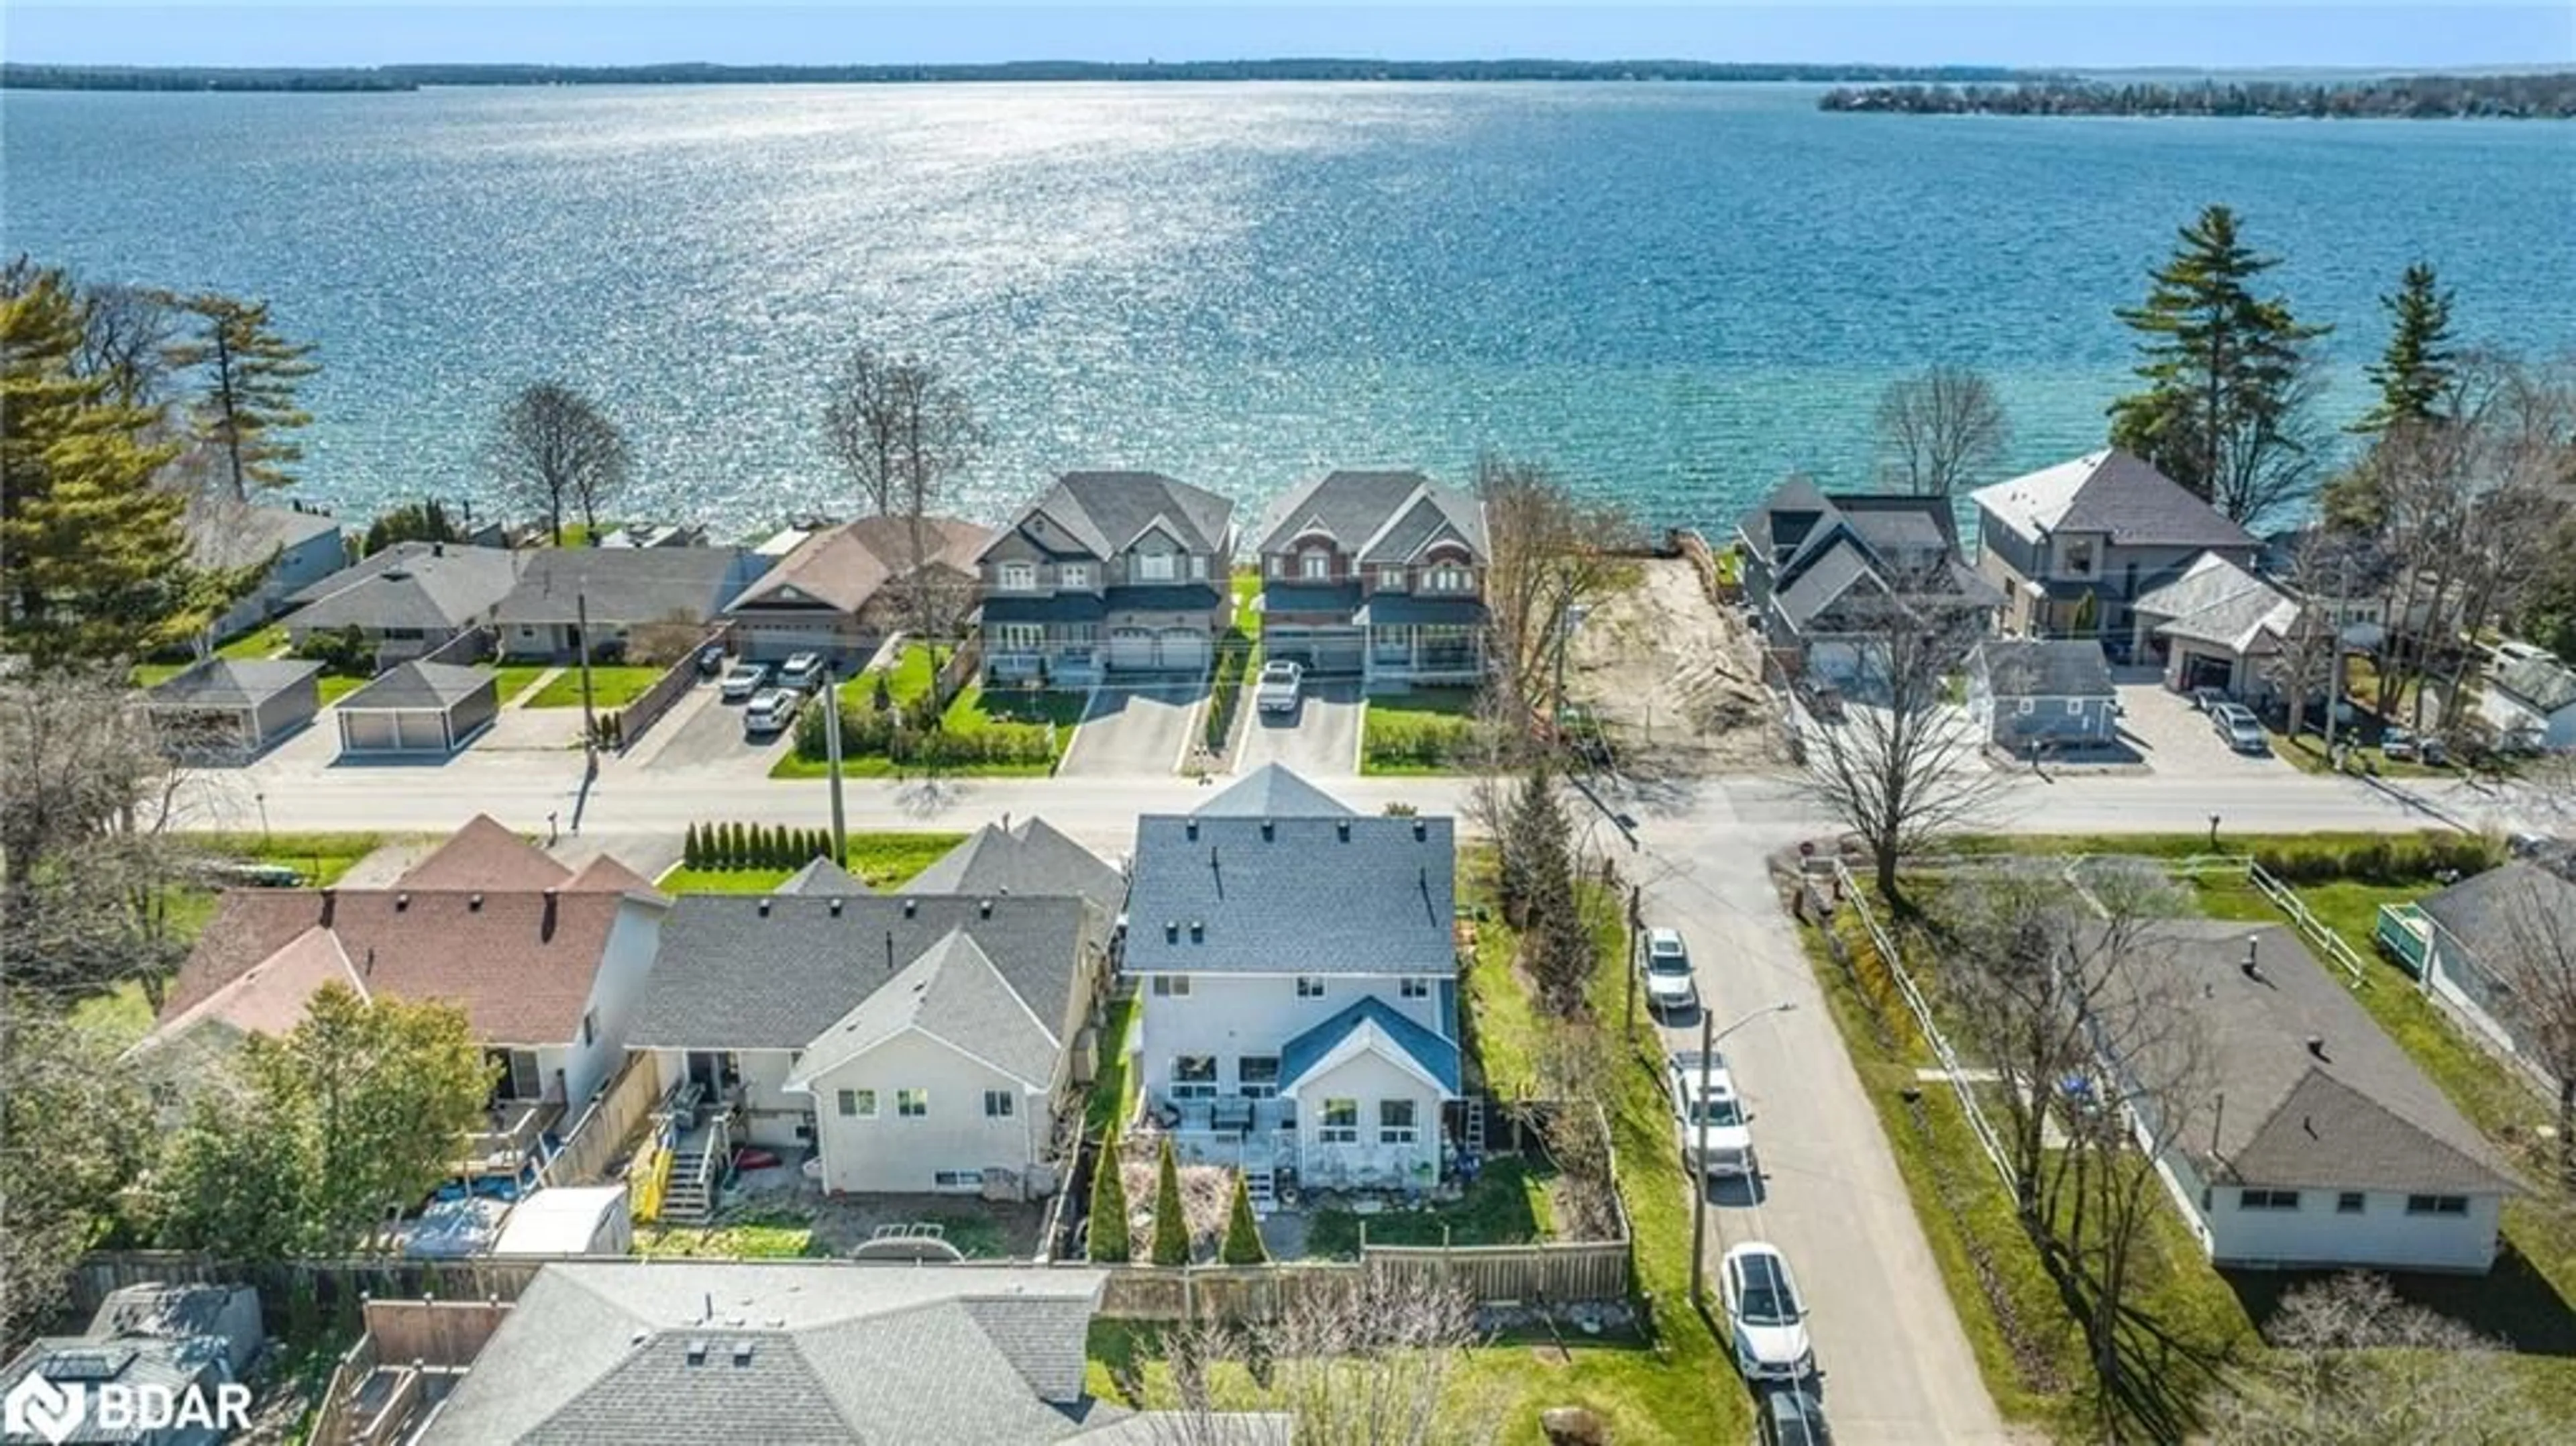 Lakeview for 684 Lakelands Ave, Innisfil Ontario L9S 4E6